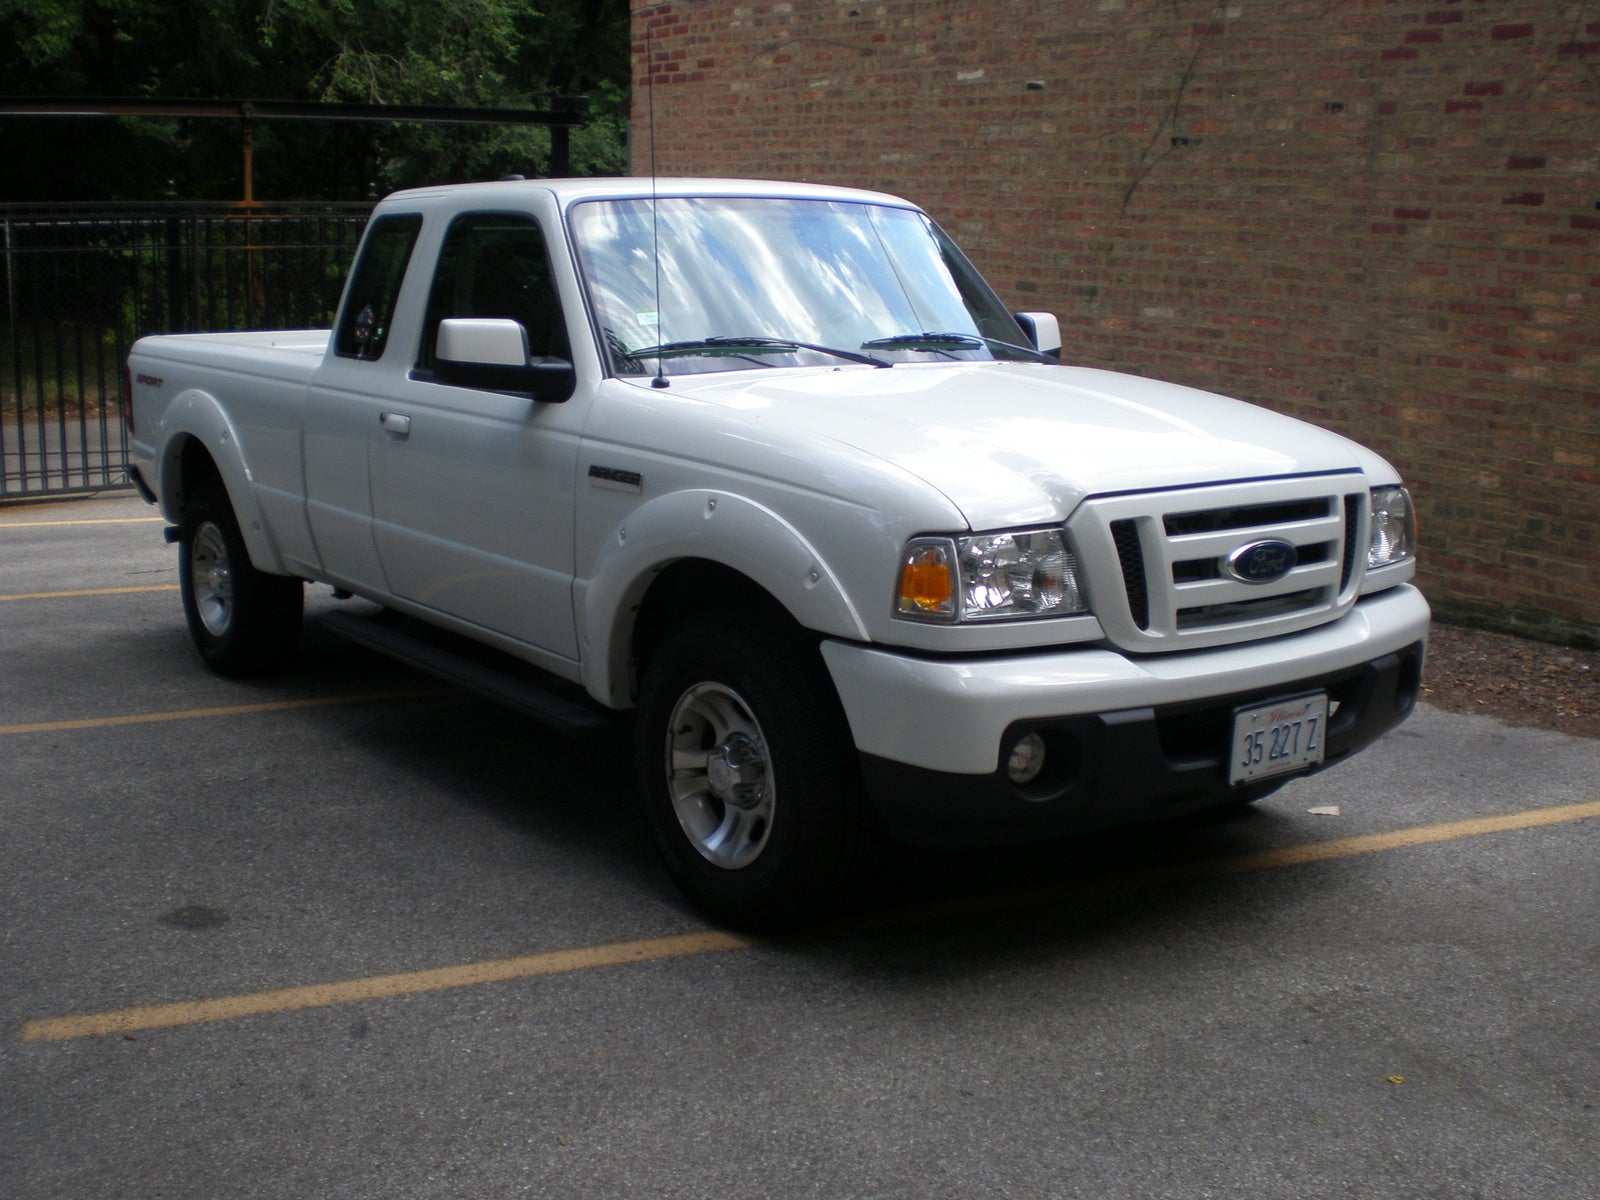 2002 Ford ranger owners manual online #9